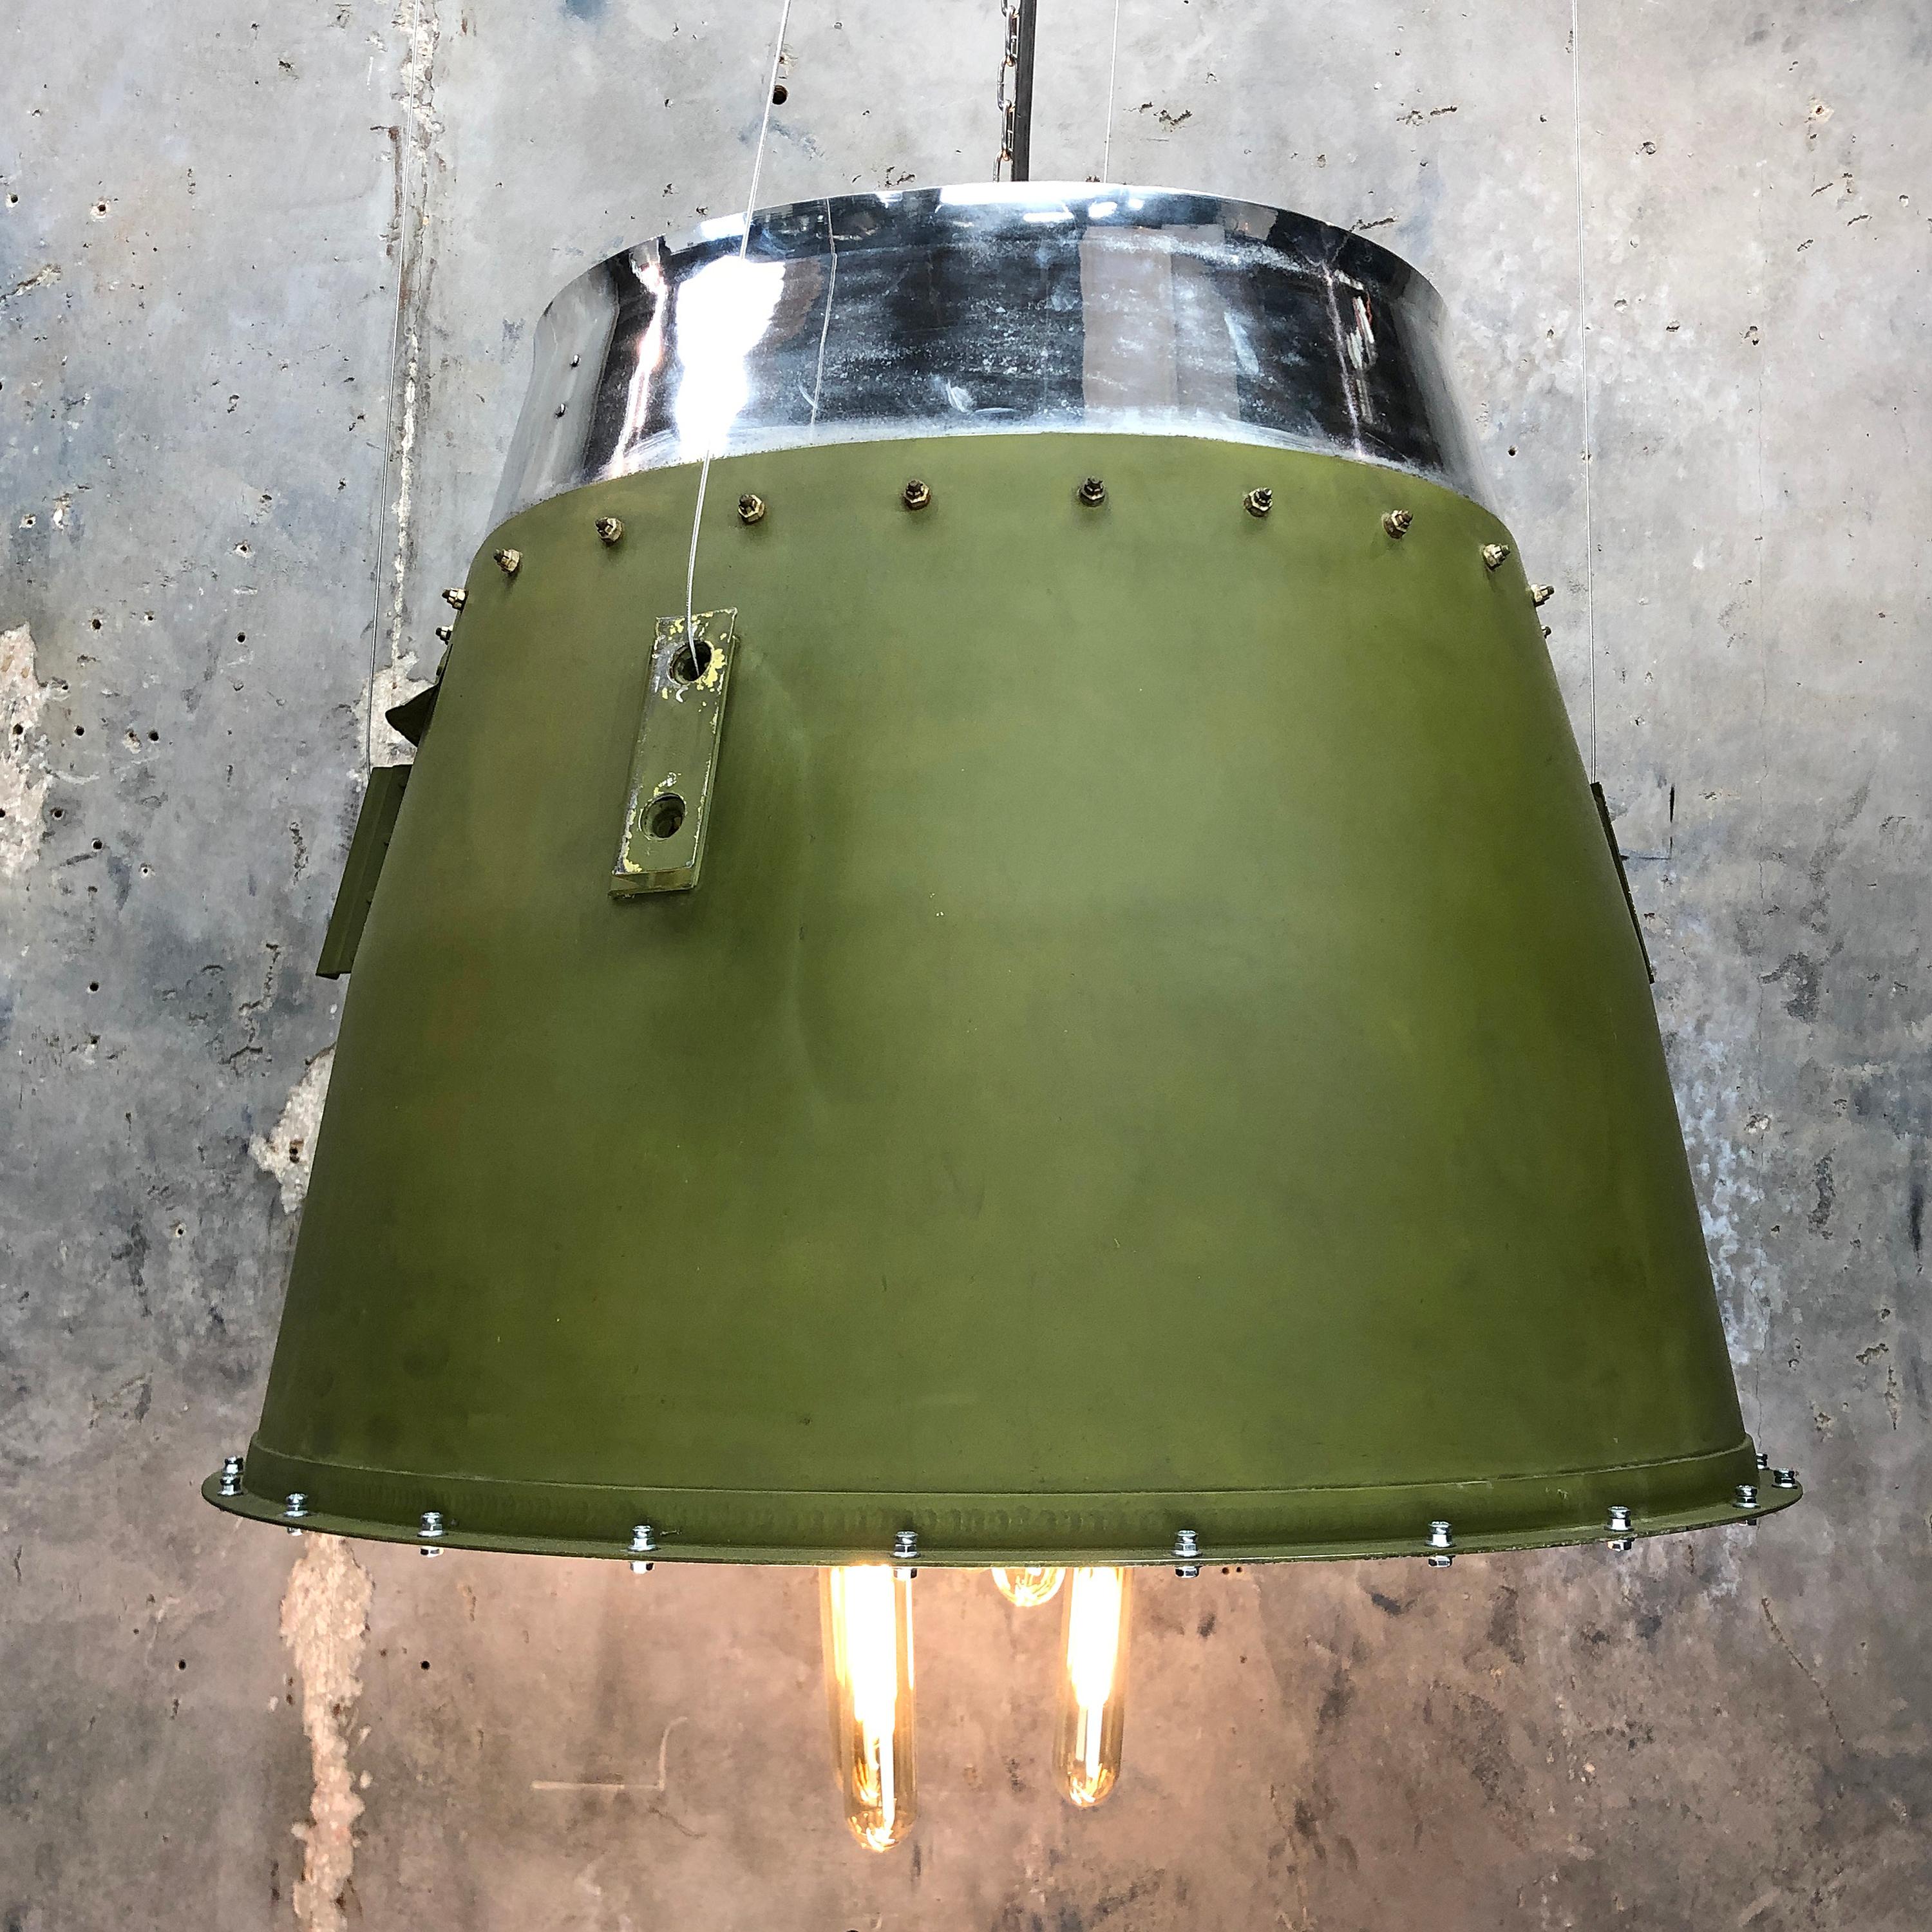 A reclaimed green jet engine cowling from a bombardier Learjet business aircraft which has been recycled and converted into a large ceiling pendant light.

This was originally found on the exhaust of the jet engine. We have both cowlings from the